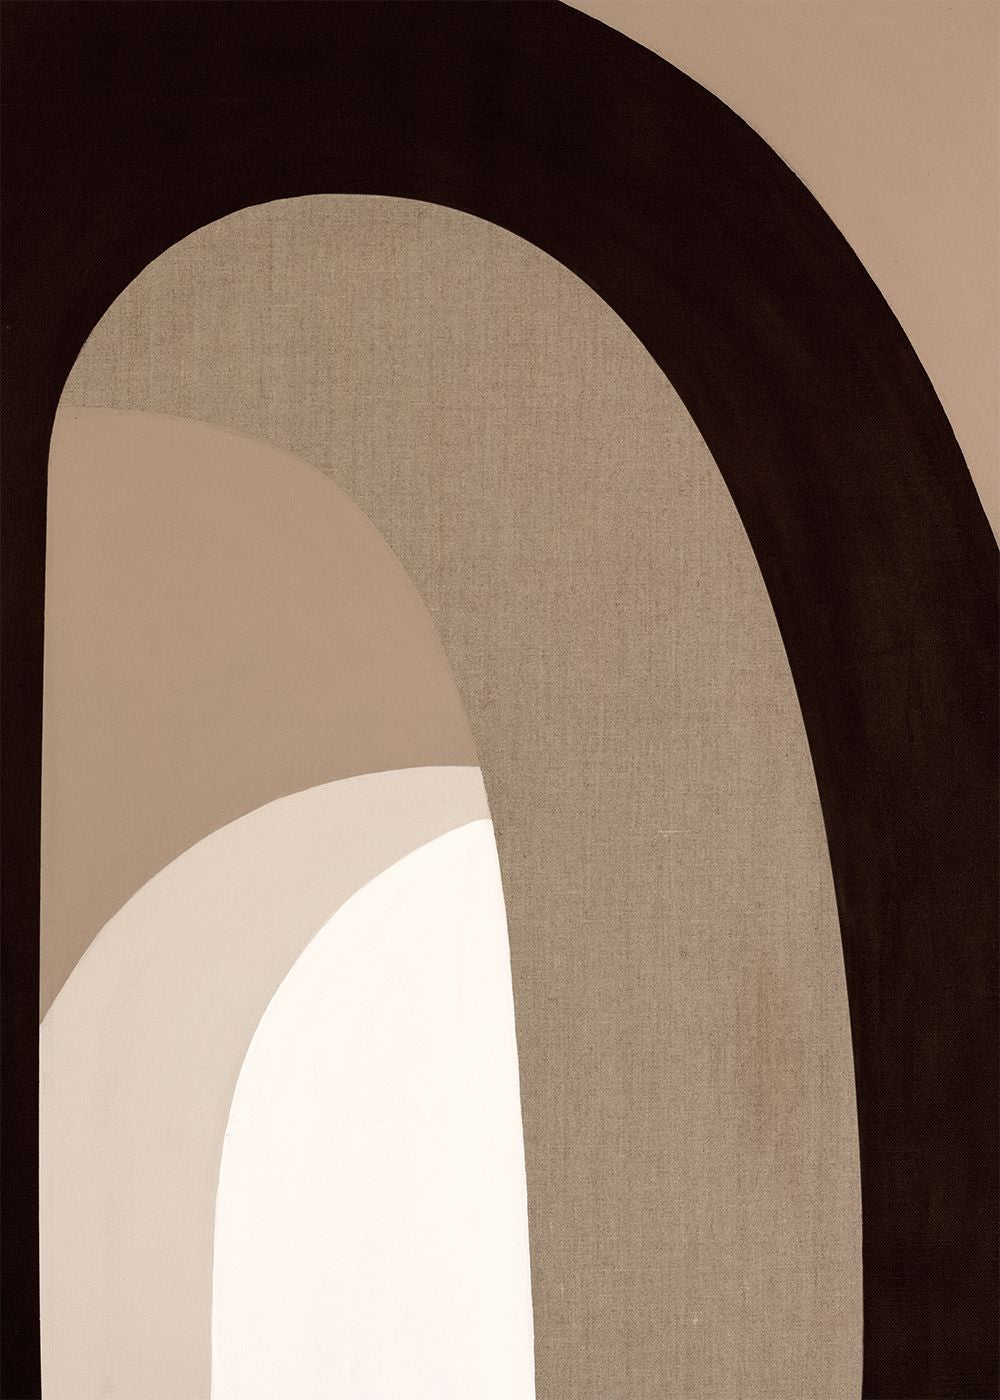 Paper Collective The Arch 01 Poster, 30x40 Cm